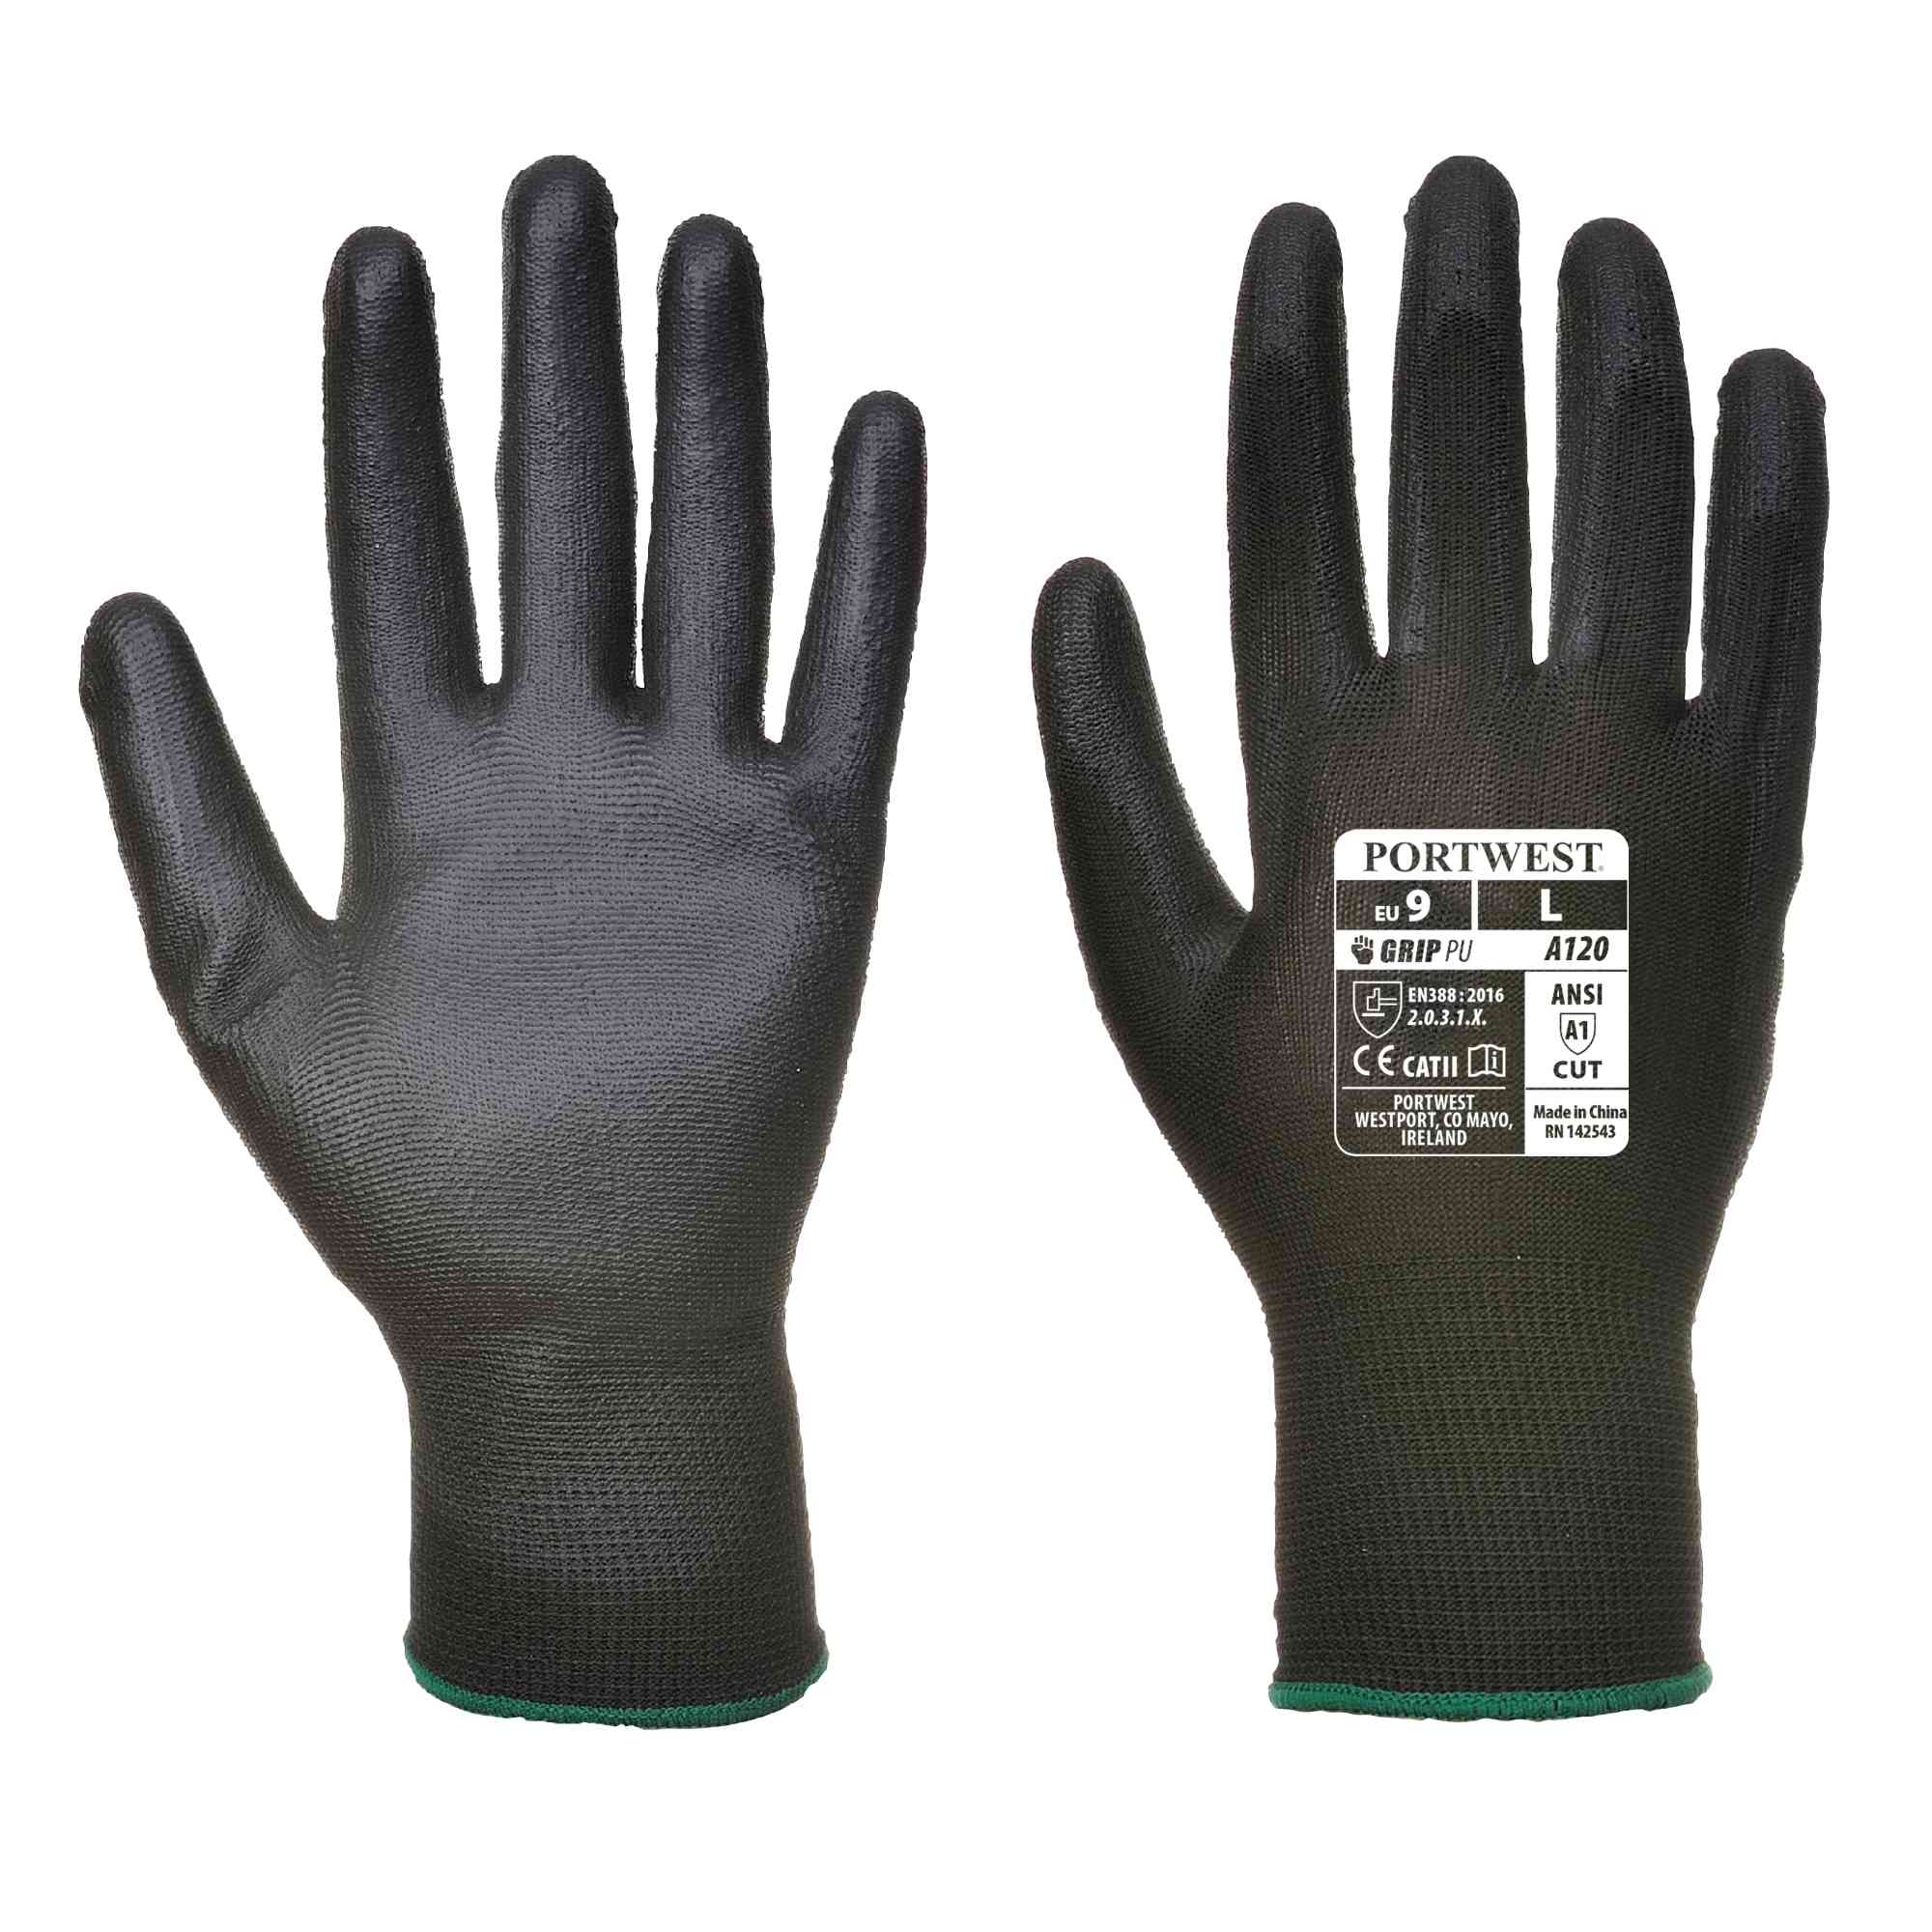 Portwest UK PU Palm Coated Safety Work Gardening Builders Gloves Breathable A120 